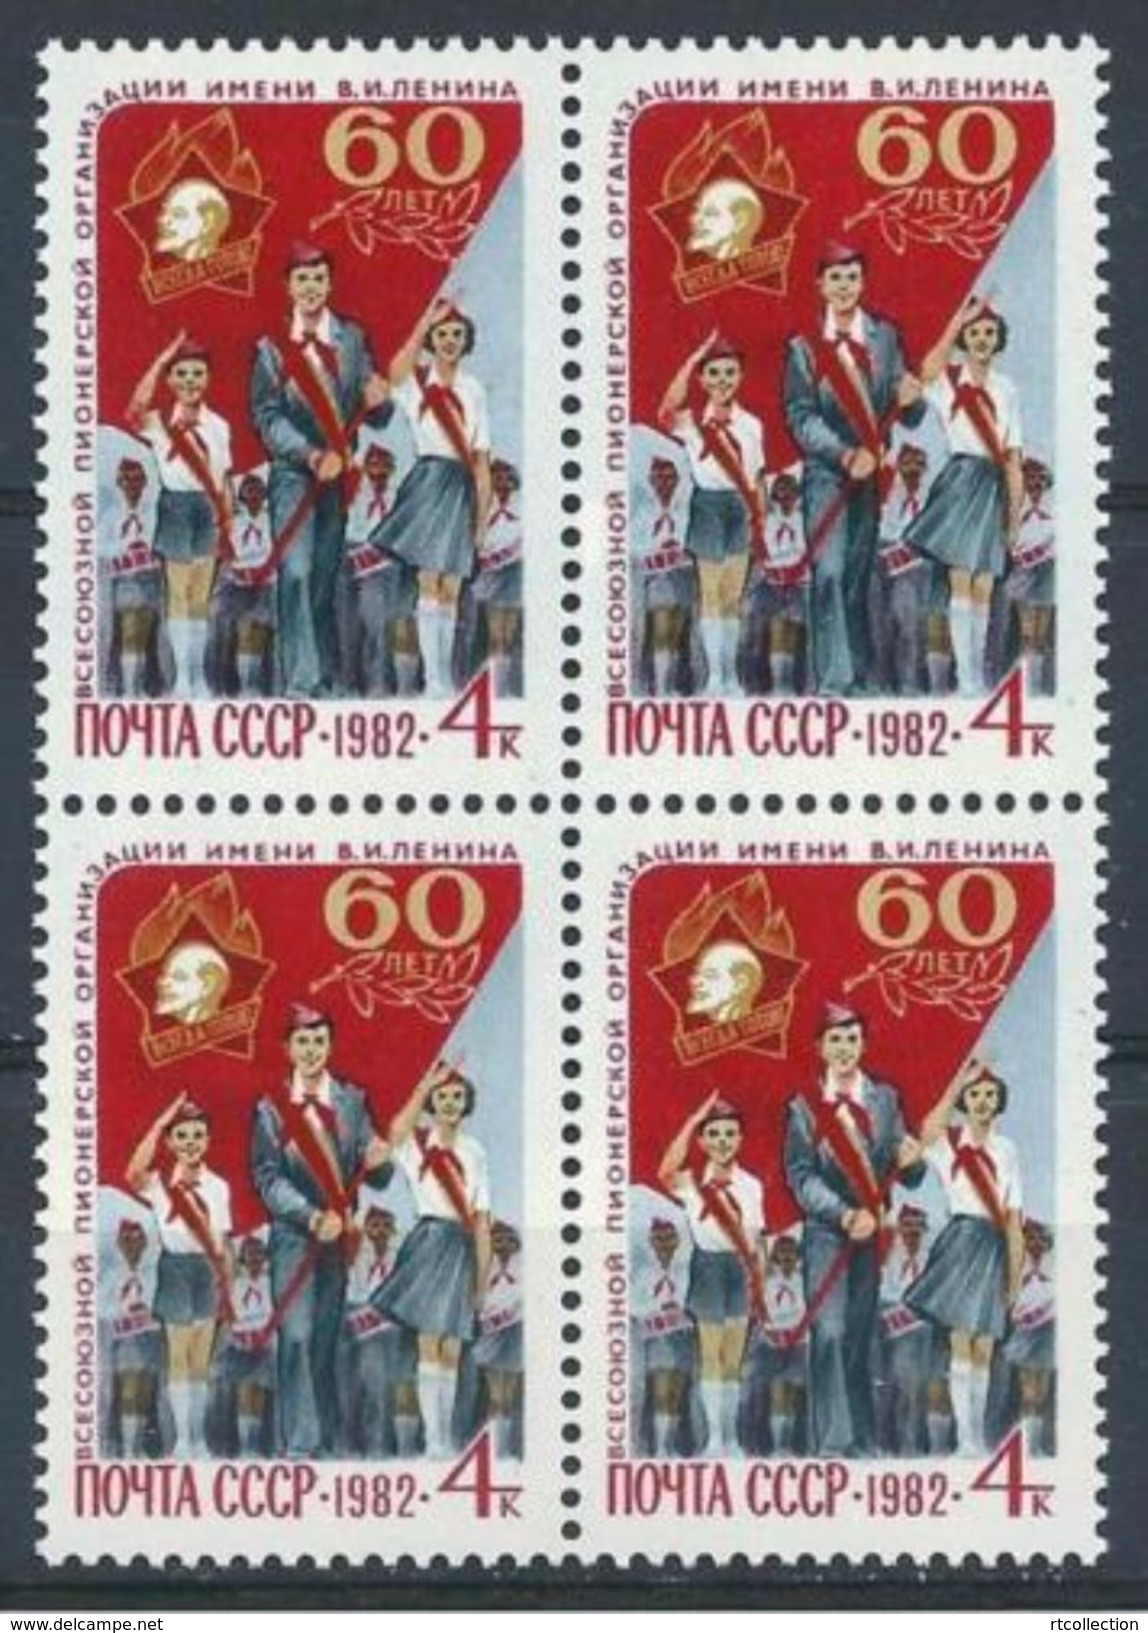 USSR Russia 1982 Block Lenin Pioneer Organizations 60th Ann Young Children Flags People Youth Stamps MNH Mi 5173 Sc#5041 - Stamps